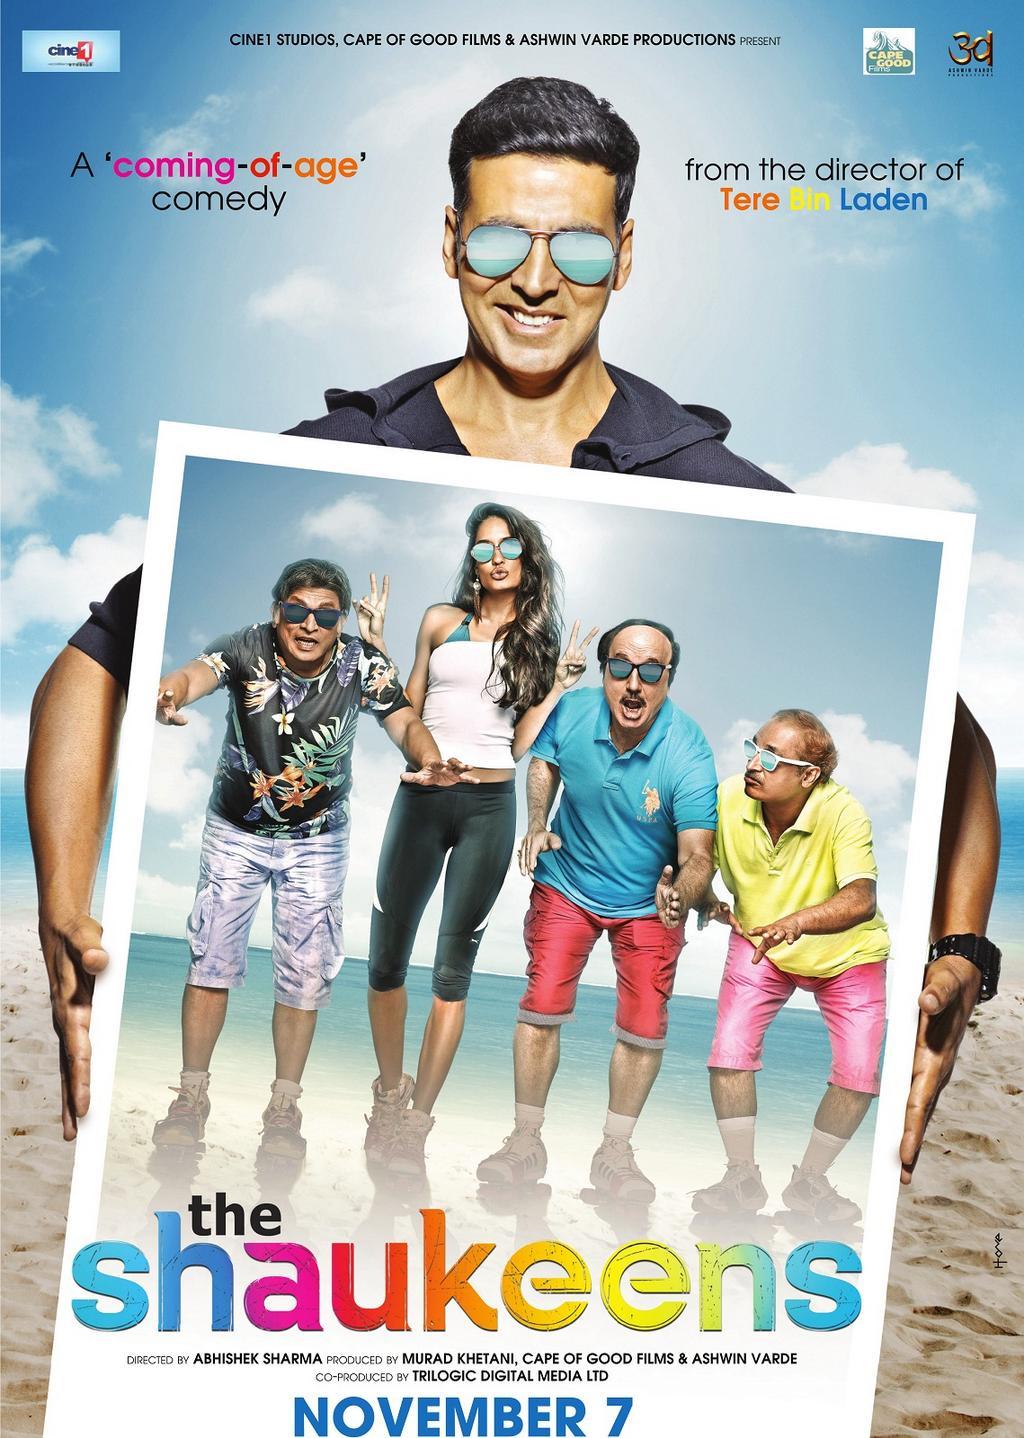 First look of Akshay Kumar Shaukeens movie - holding a picture of other Shaukeens